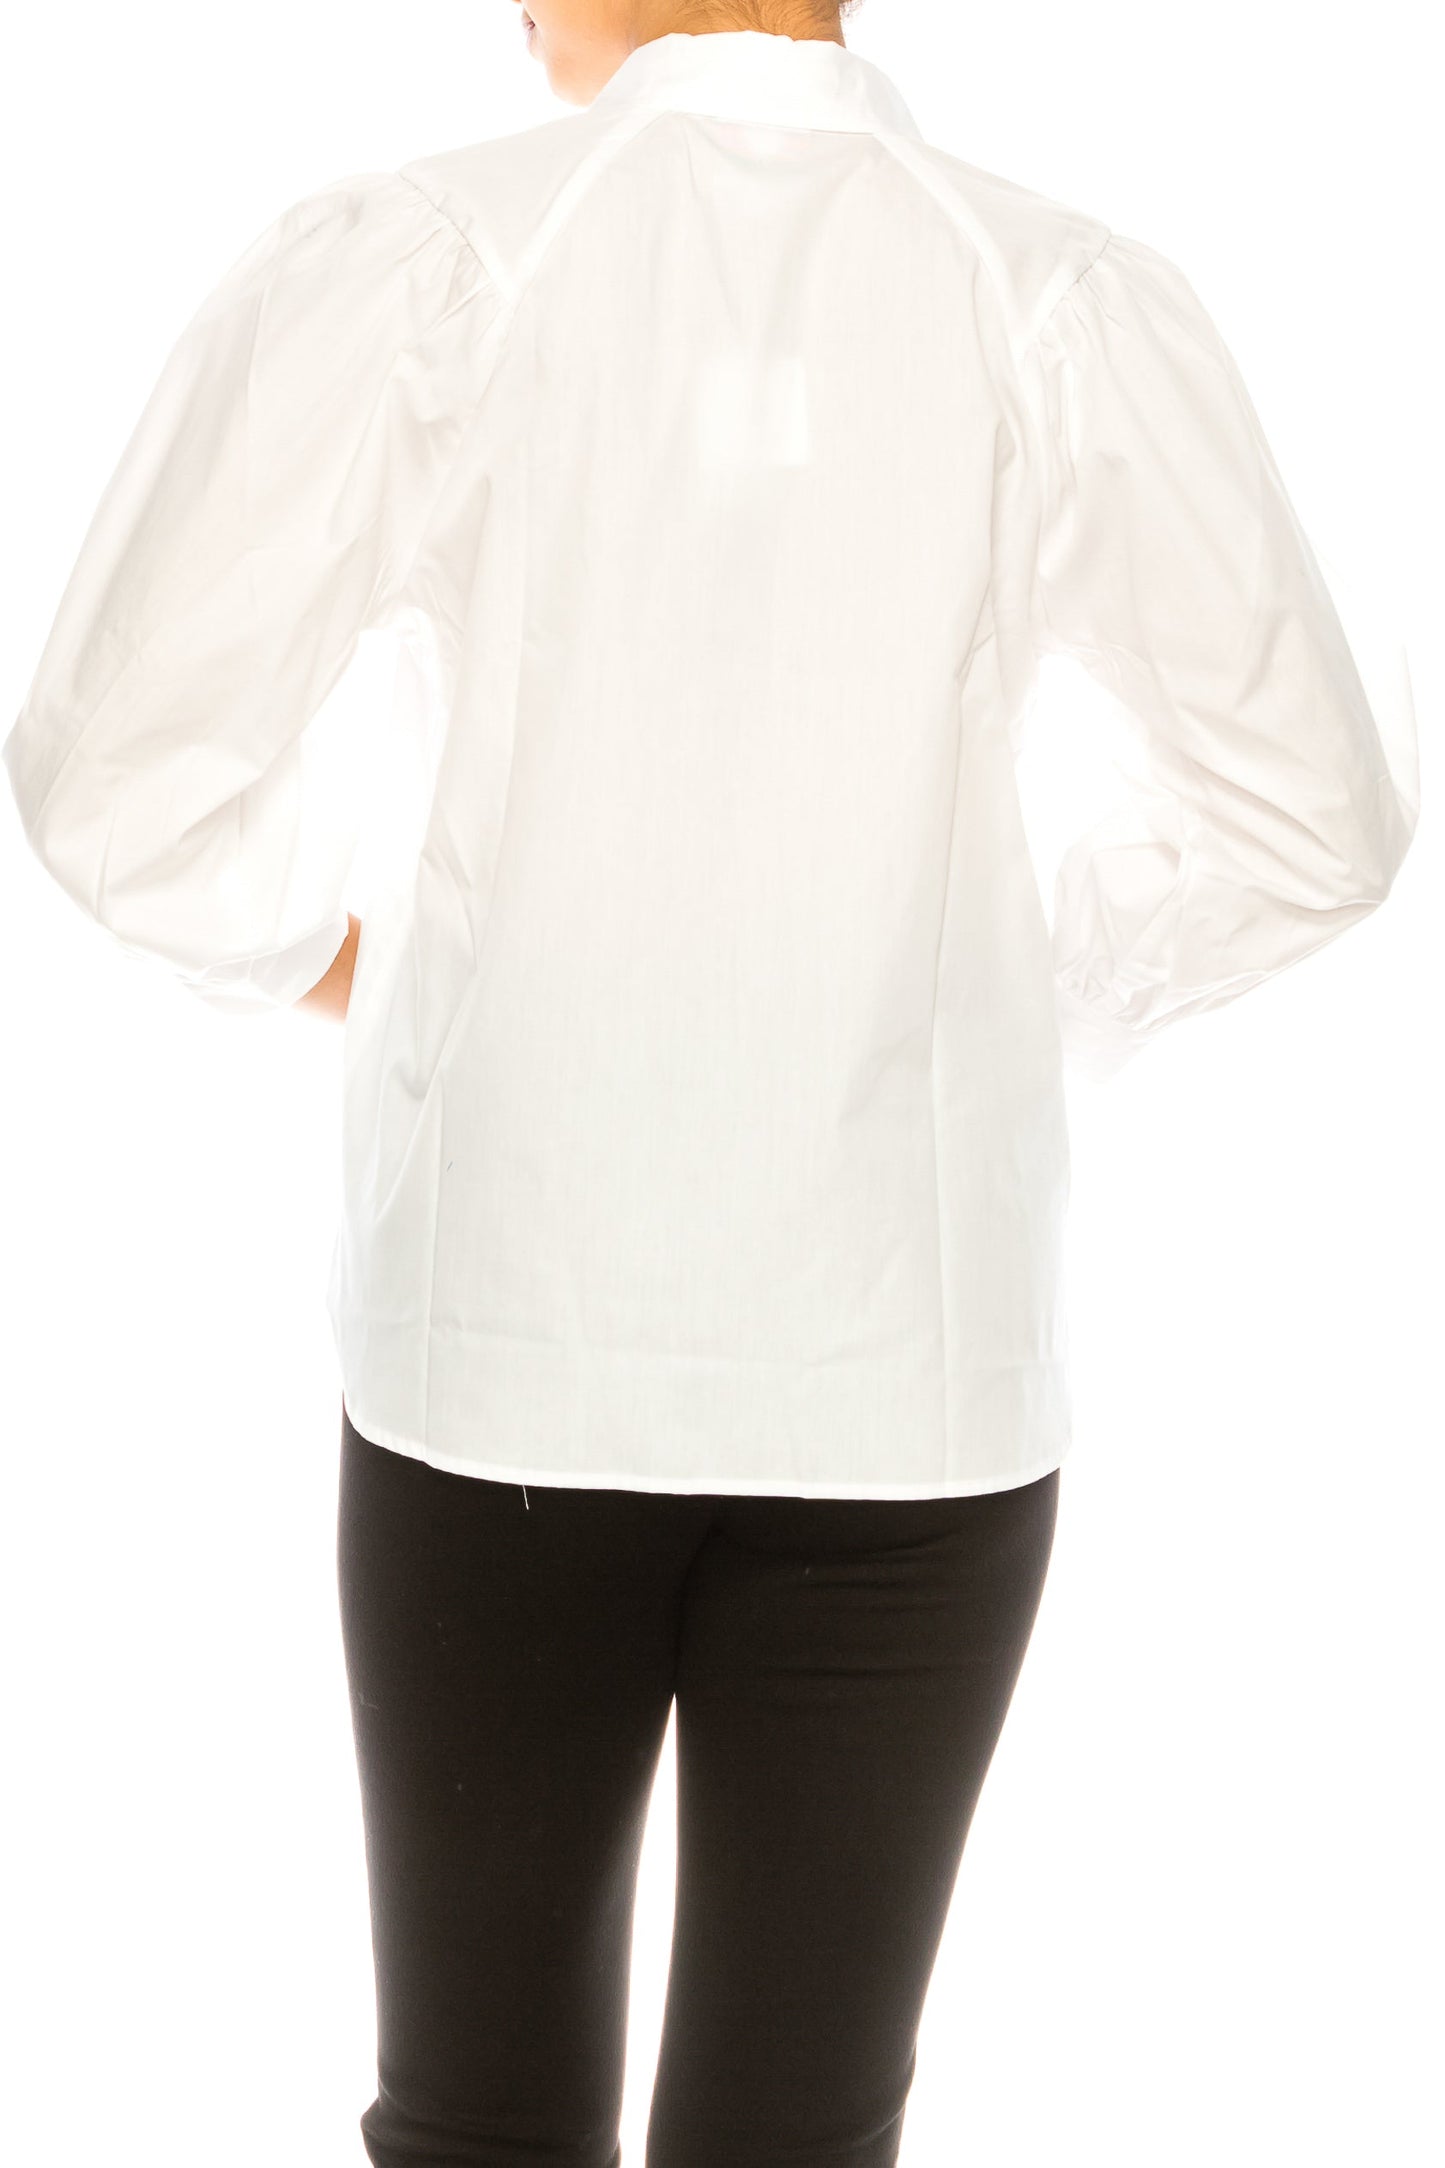 Hester & Orchid White Button Up Collared Top